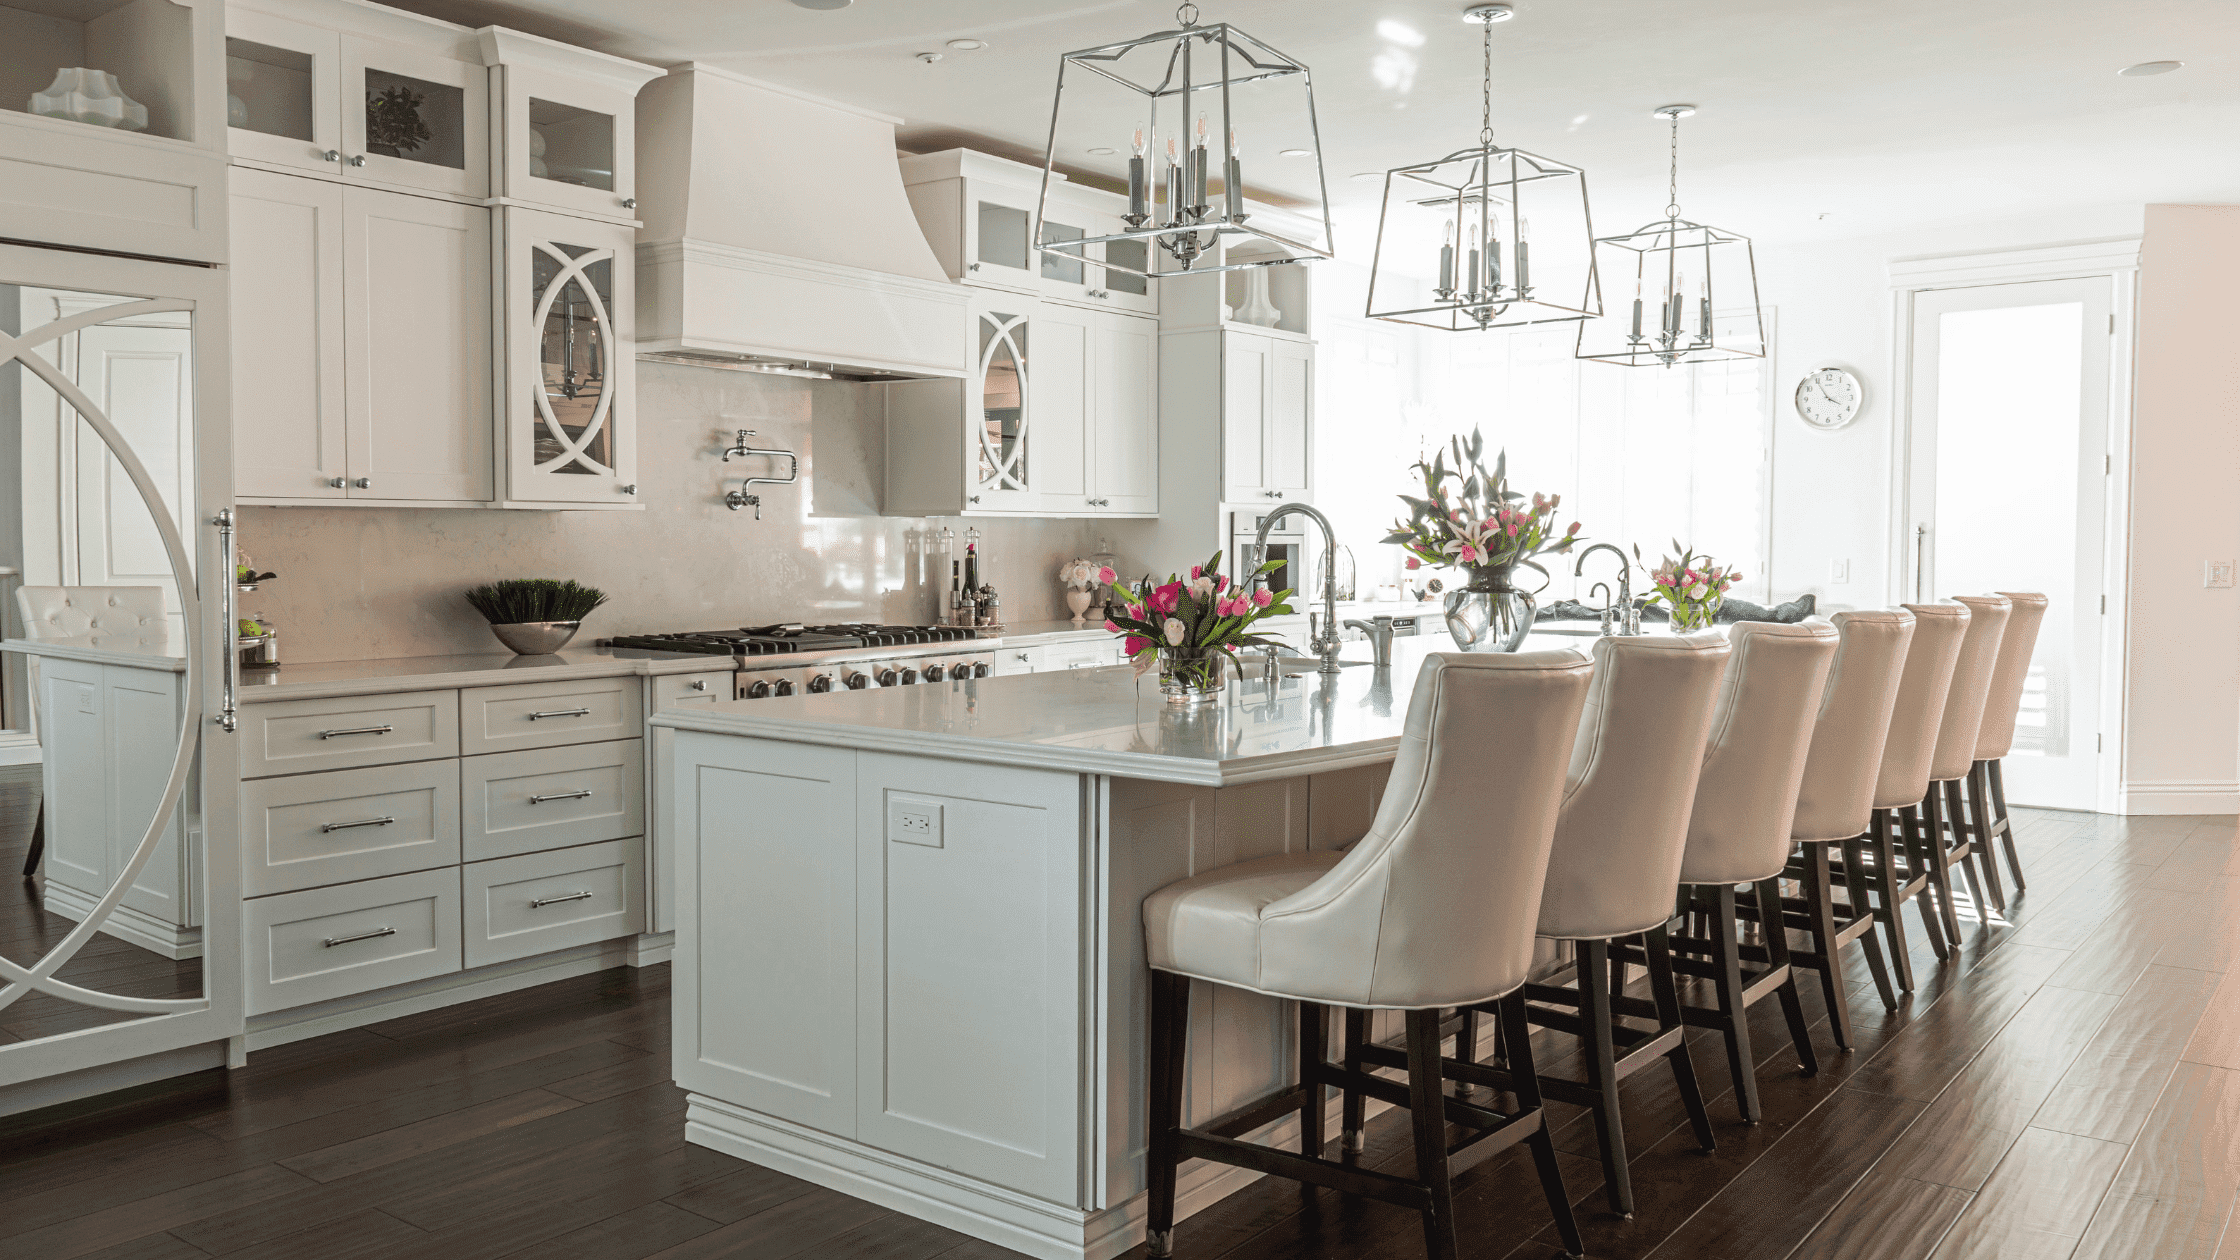 kitchen remodeling cost